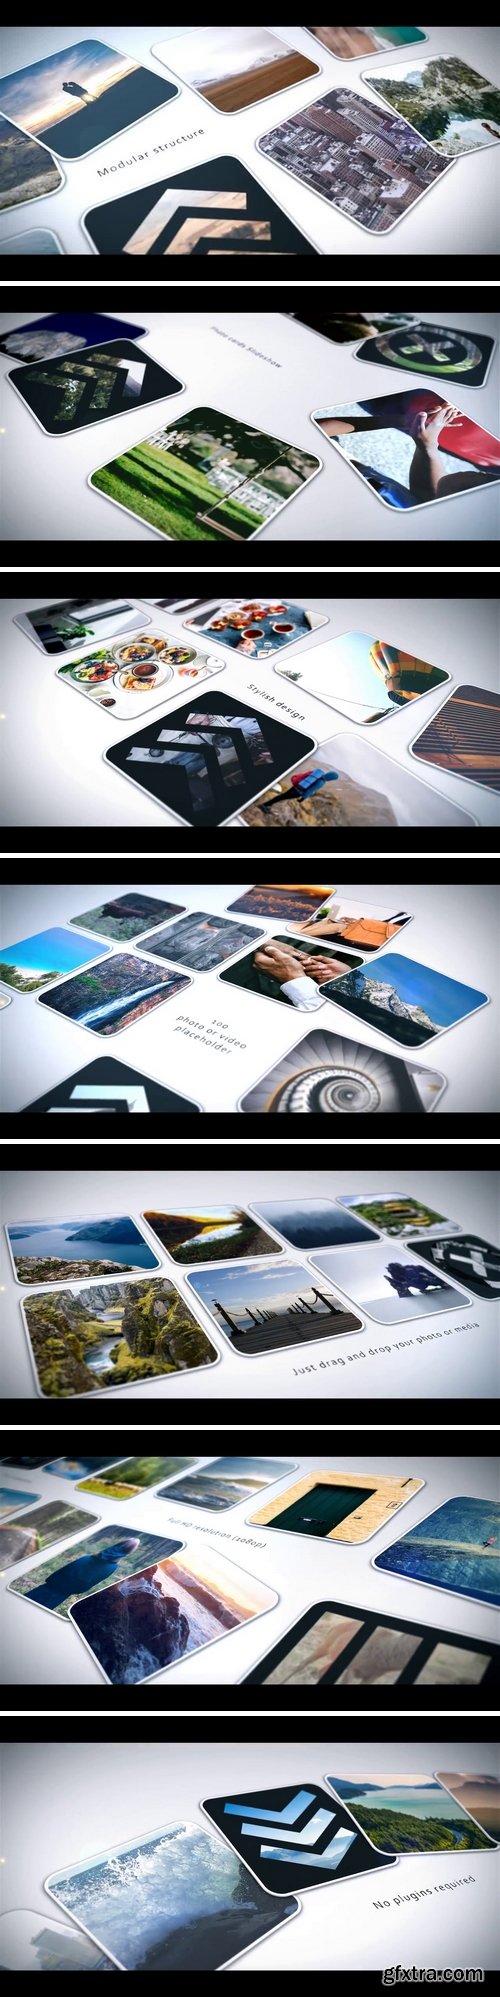 MotionArray - Photo Cards After Effects Templates 85756